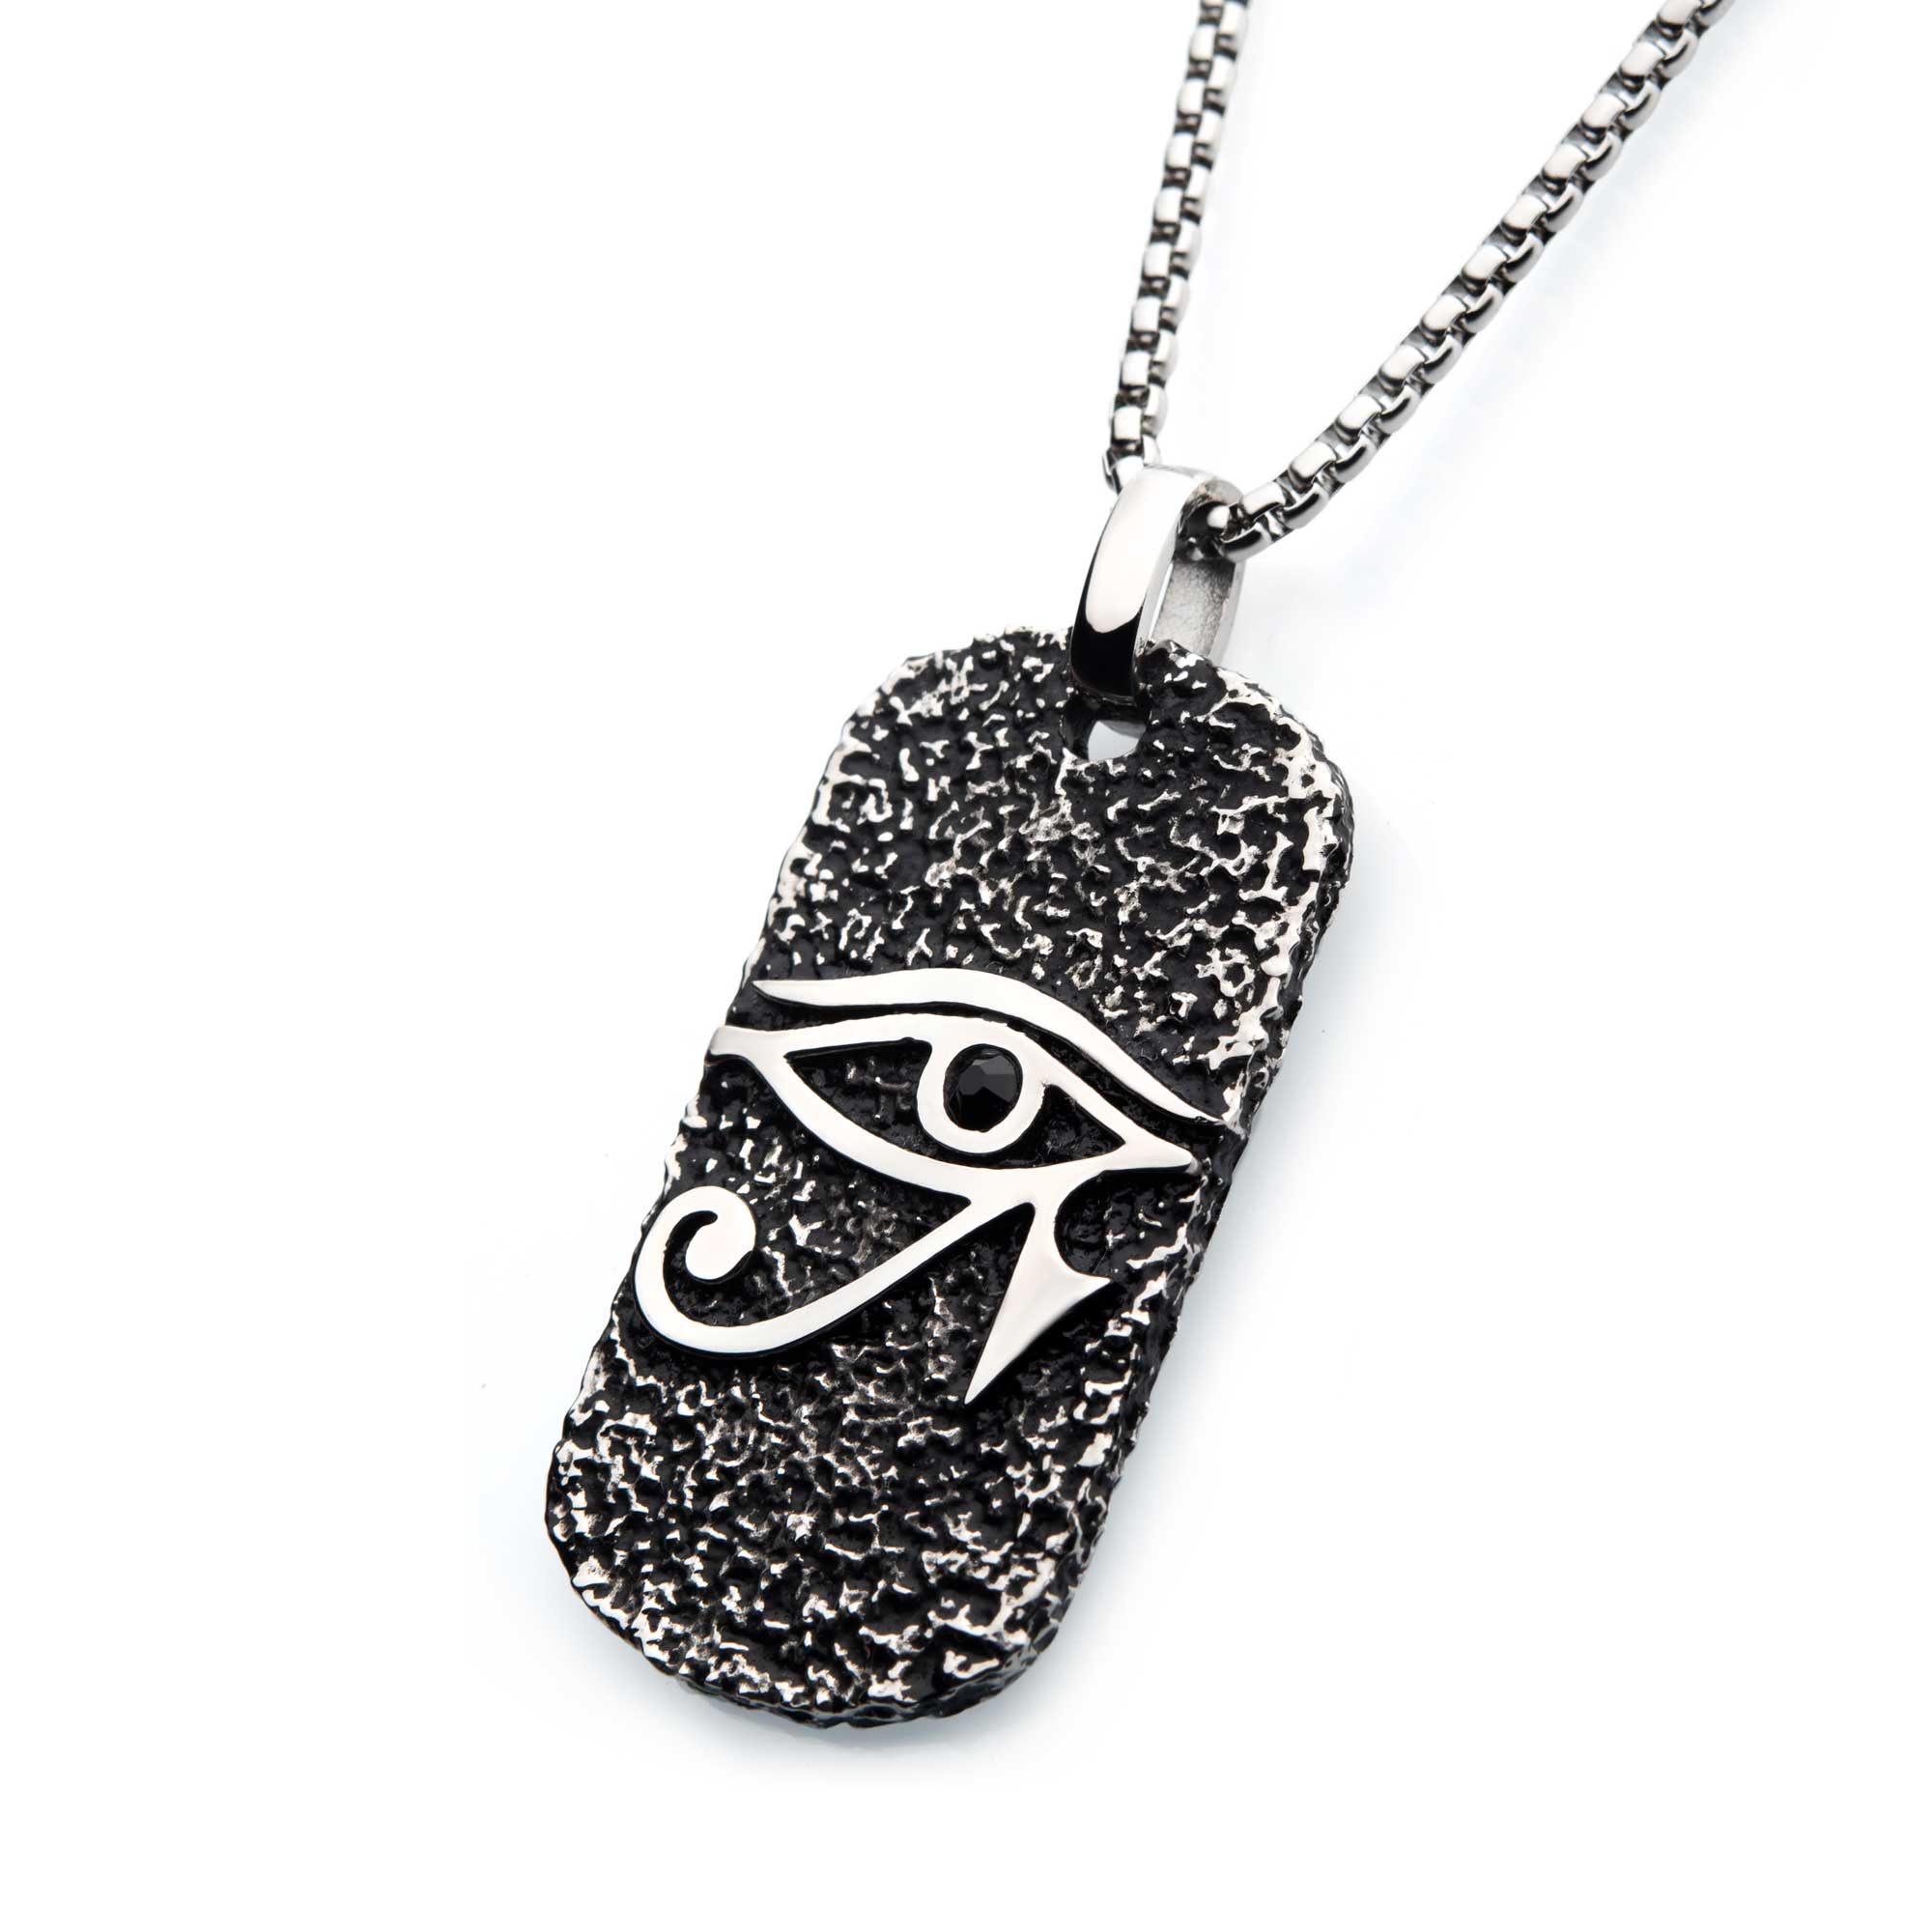 Black Oxidized Stainless Steel with Black CZ Eye of Horus Dog Tag Pendant, with Steel Box Chain Image 2 Midtown Diamonds Reno, NV